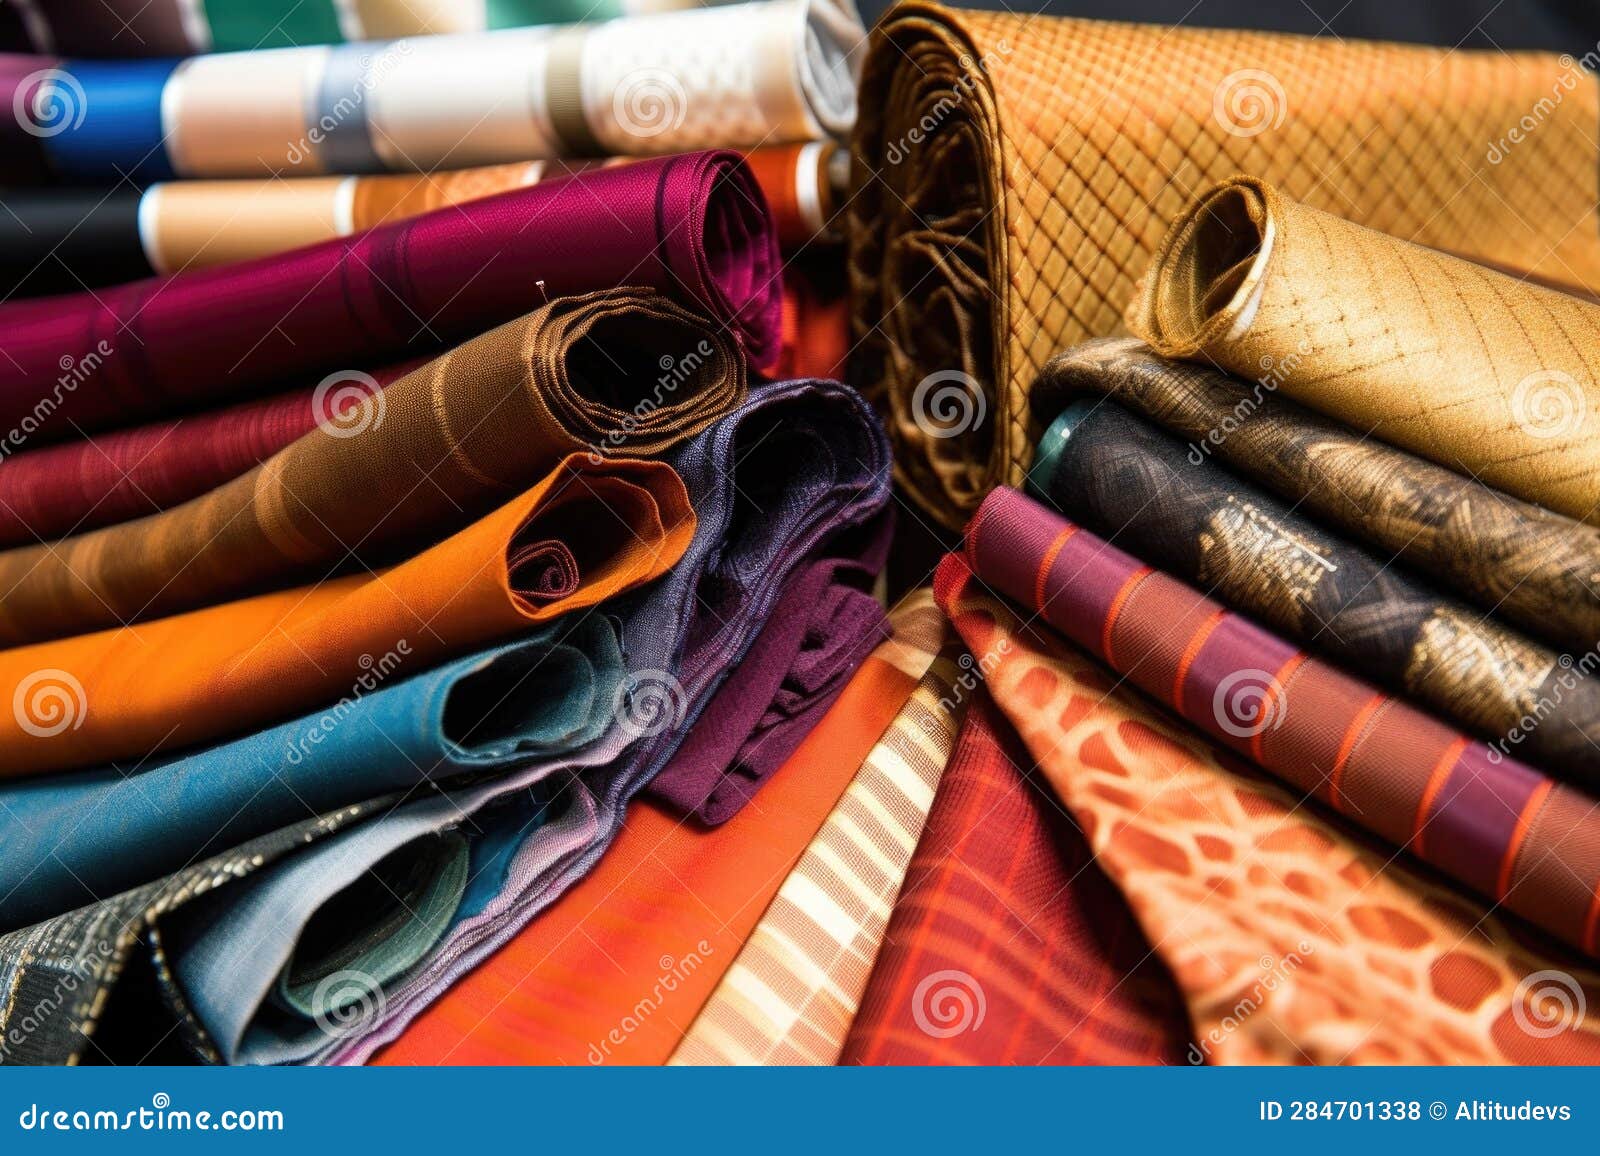 Fabrics and Textile Samples for Suit Making Stock Photo - Image of ...